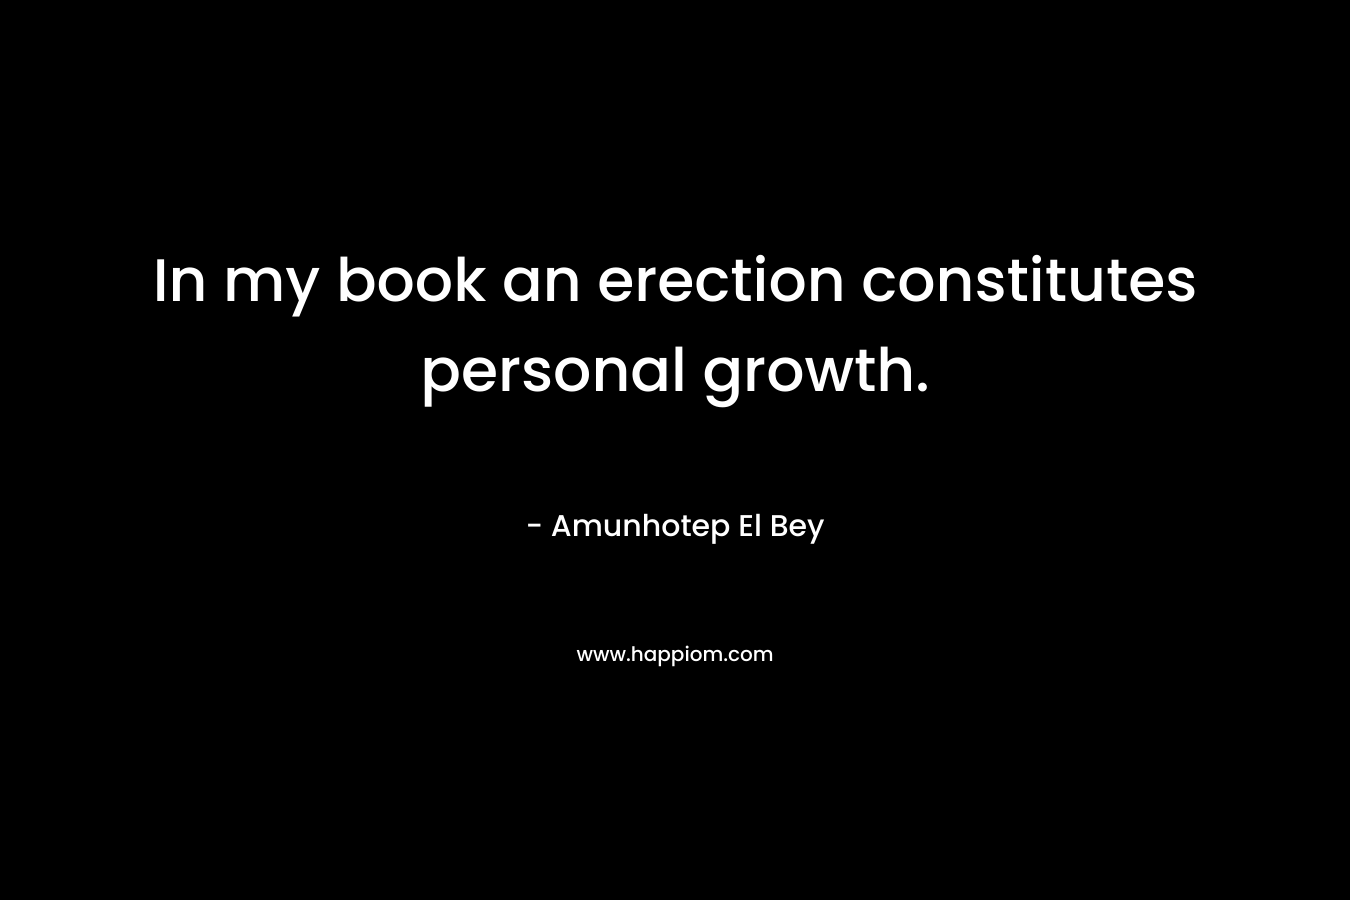 In my book an erection constitutes personal growth.